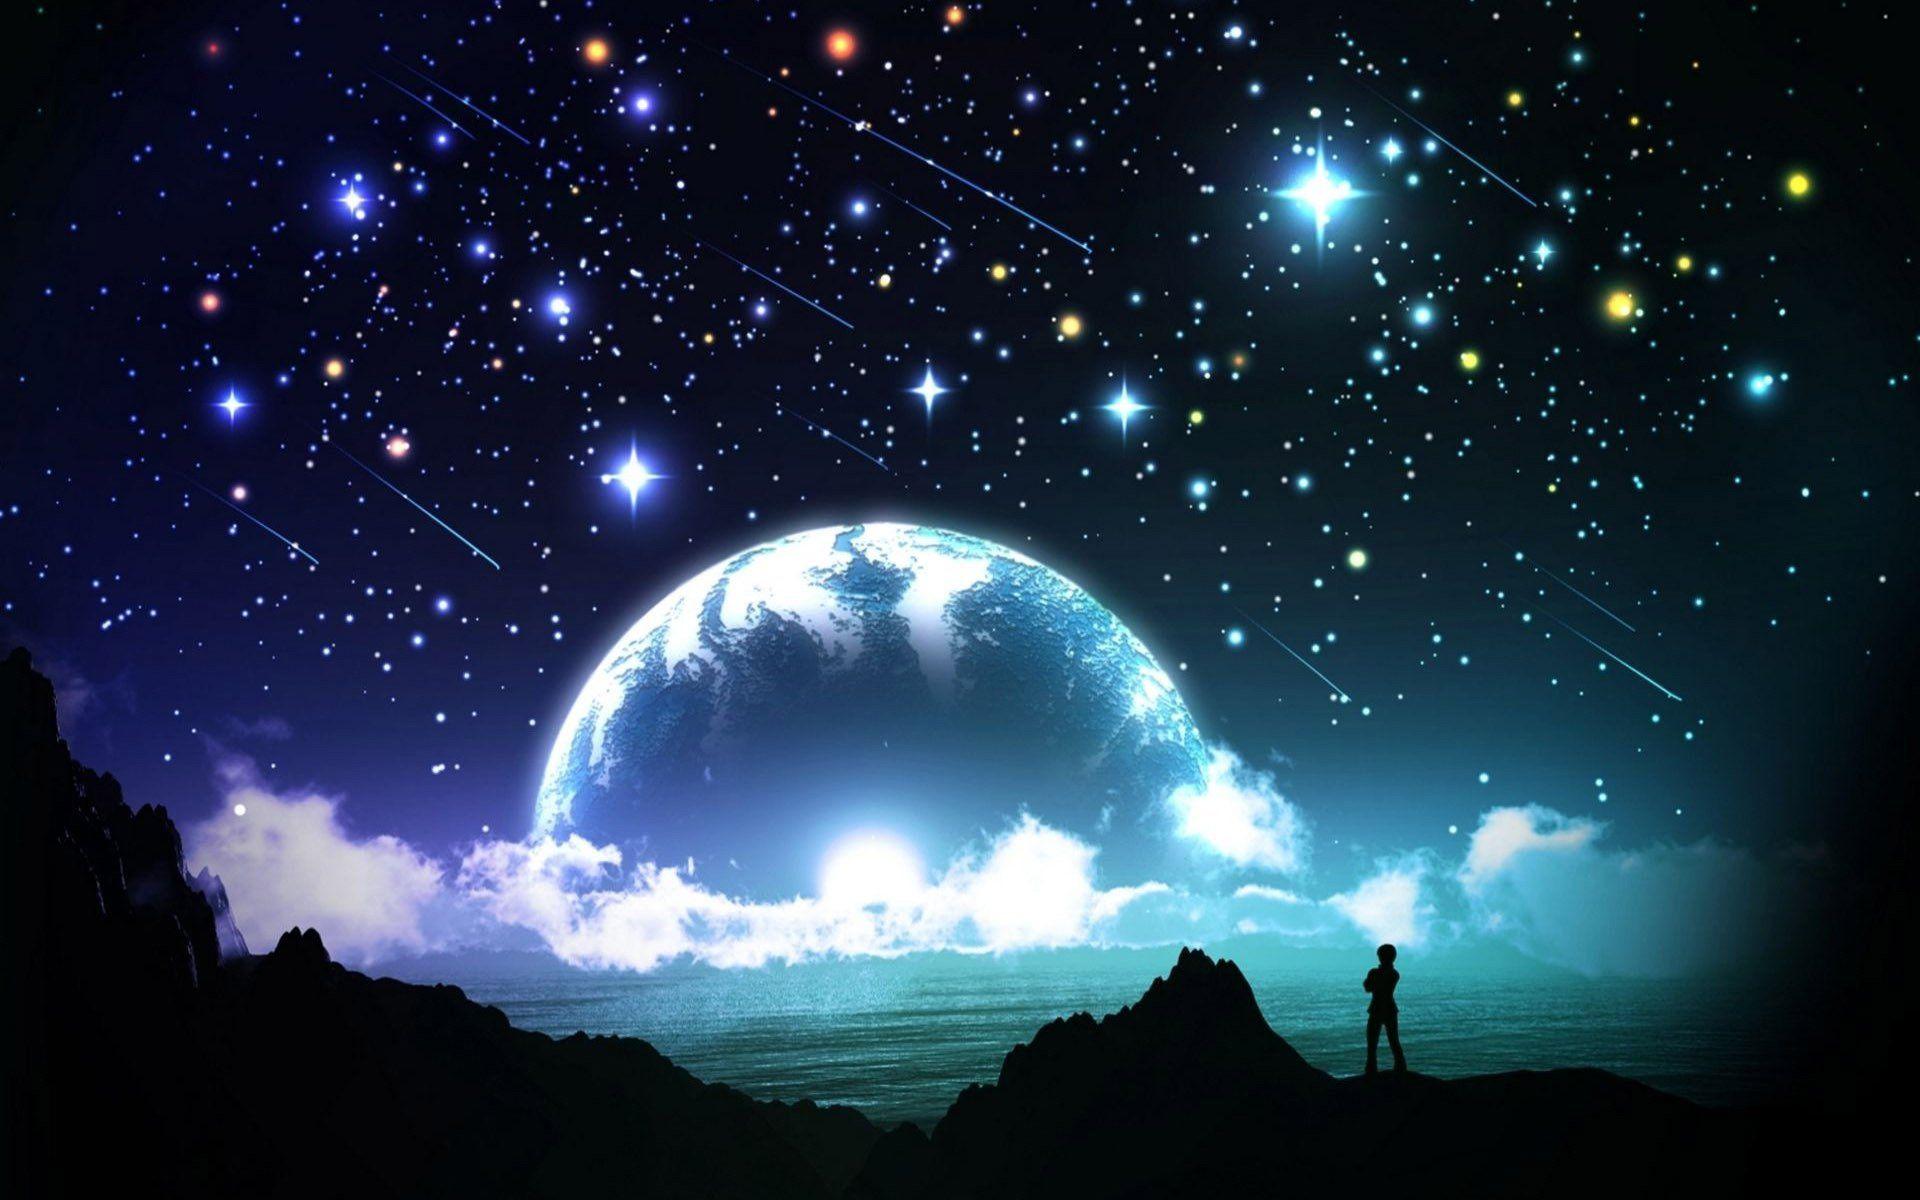 Night Sky Stars HD Wallpaper, Image And Photo Download Free